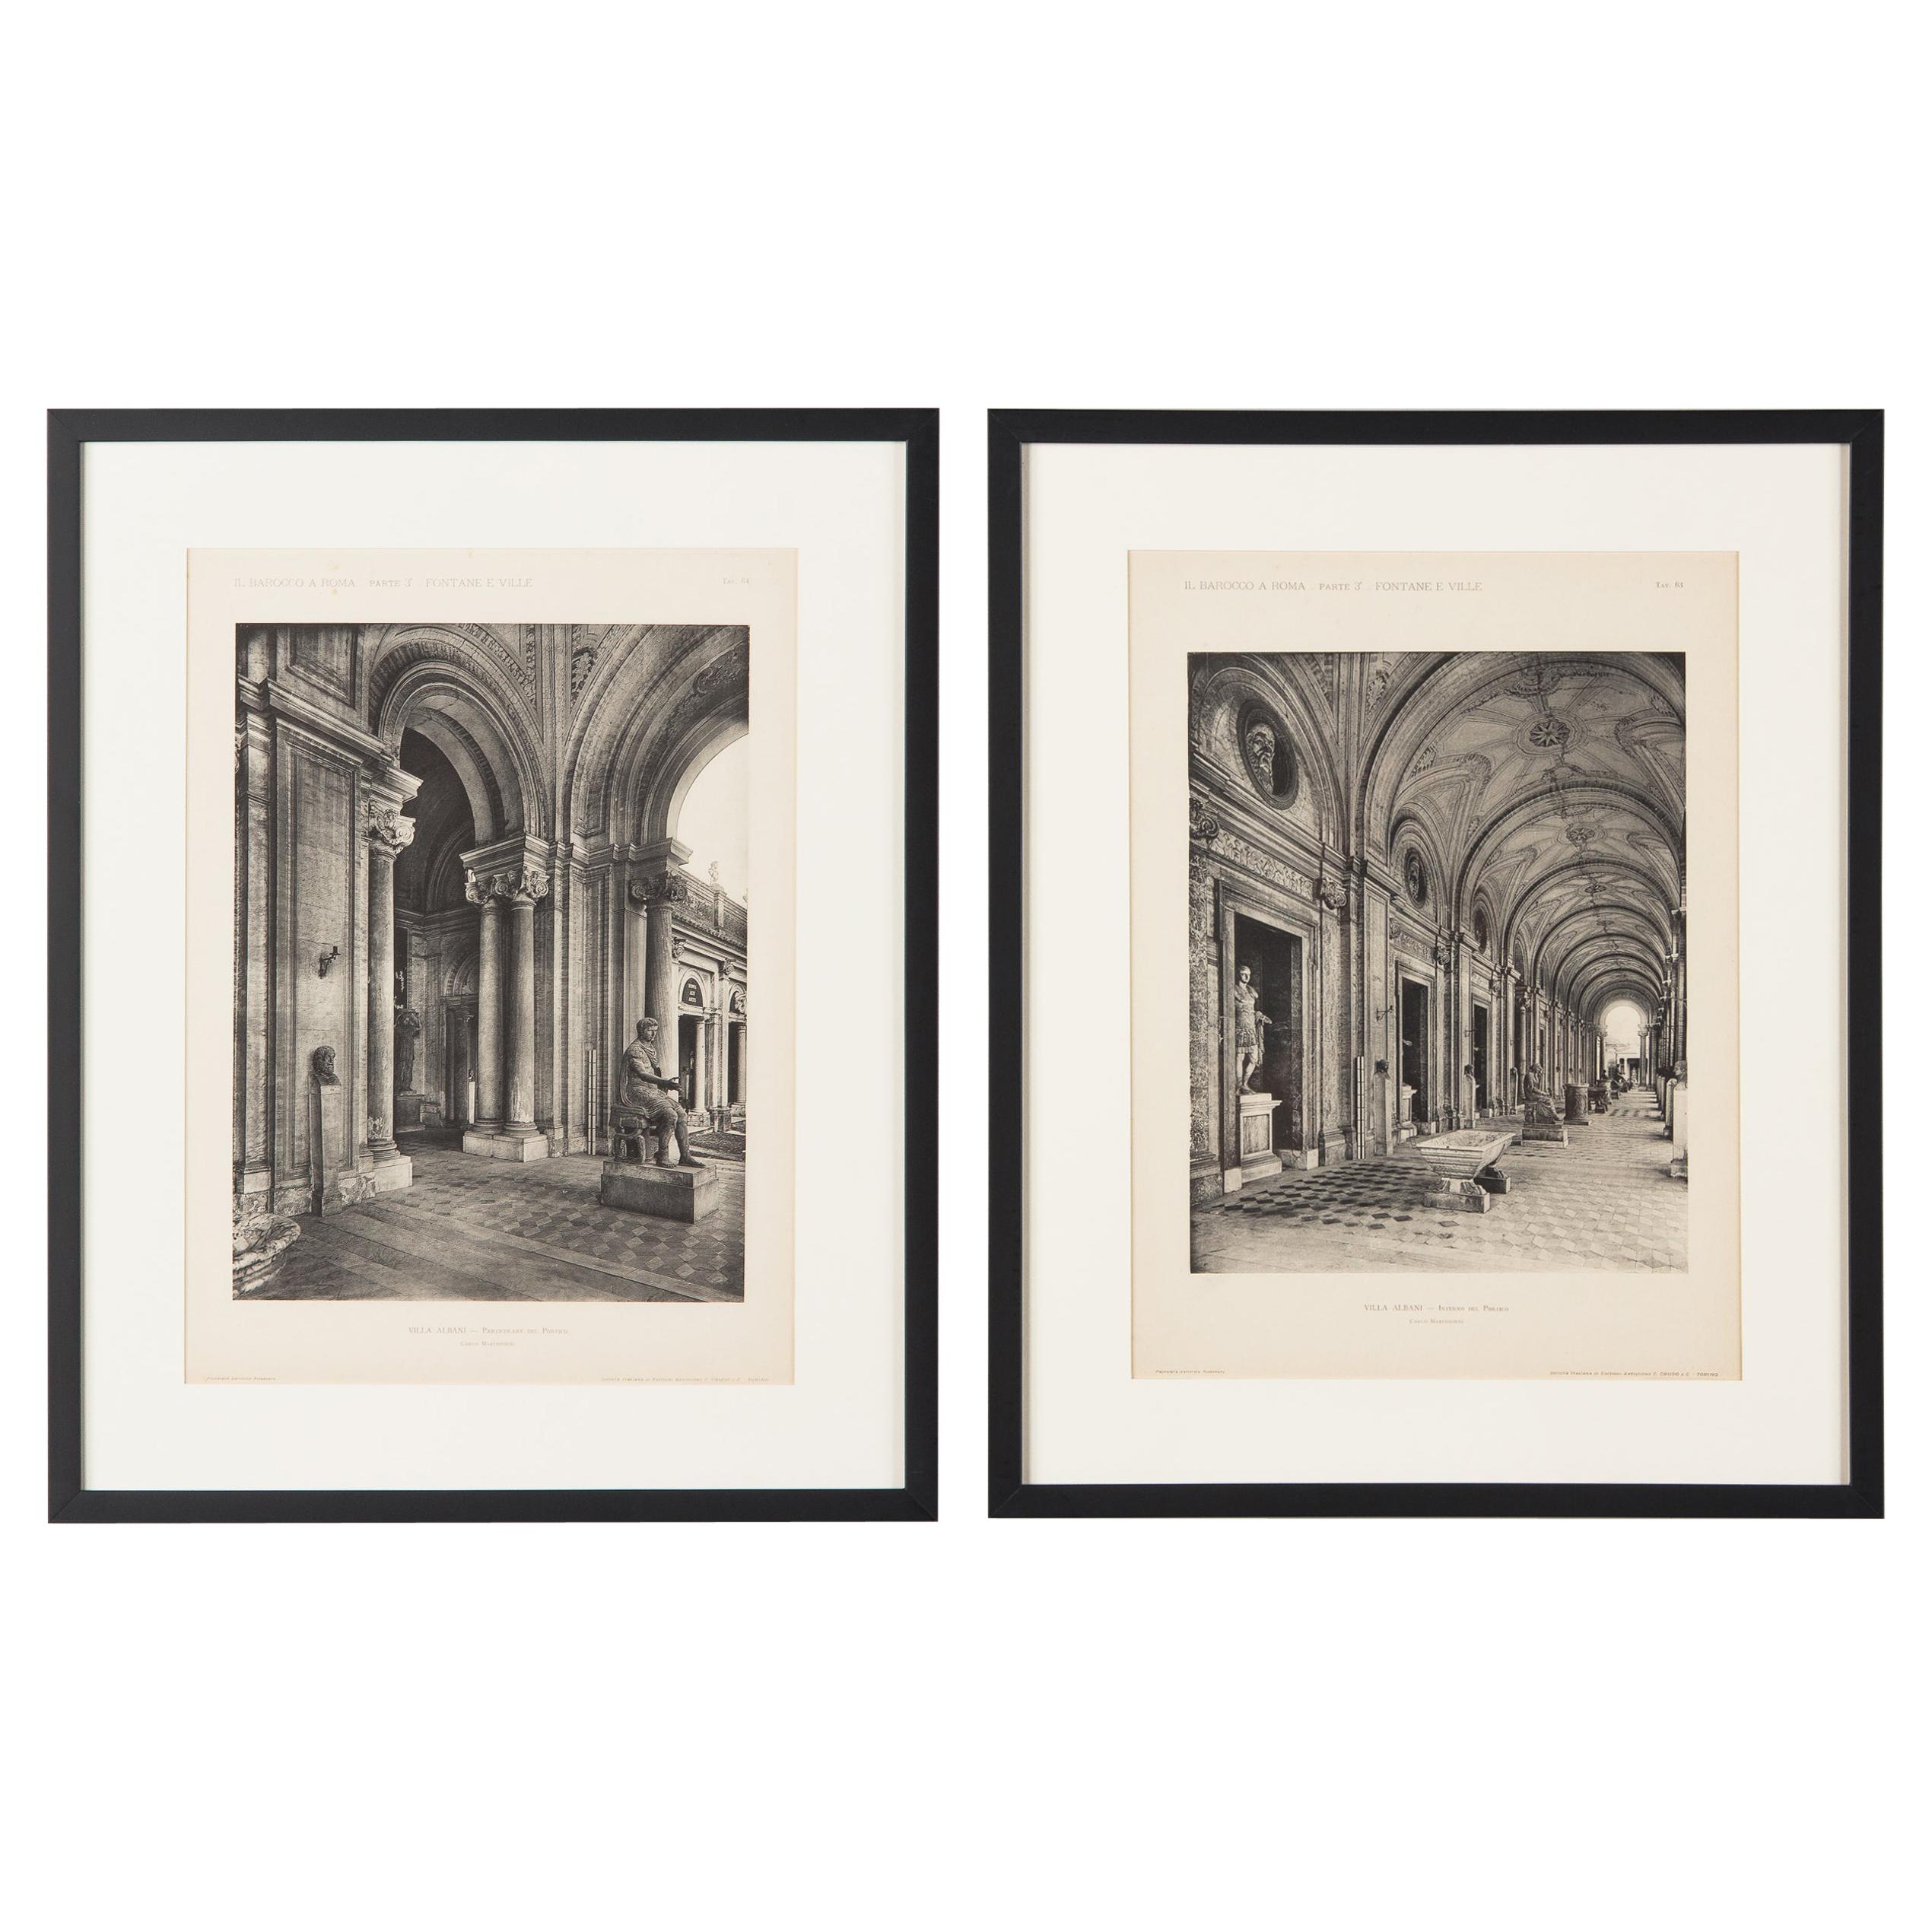 Pair of Framed Architectural Prints, Italy, Early 1900s For Sale